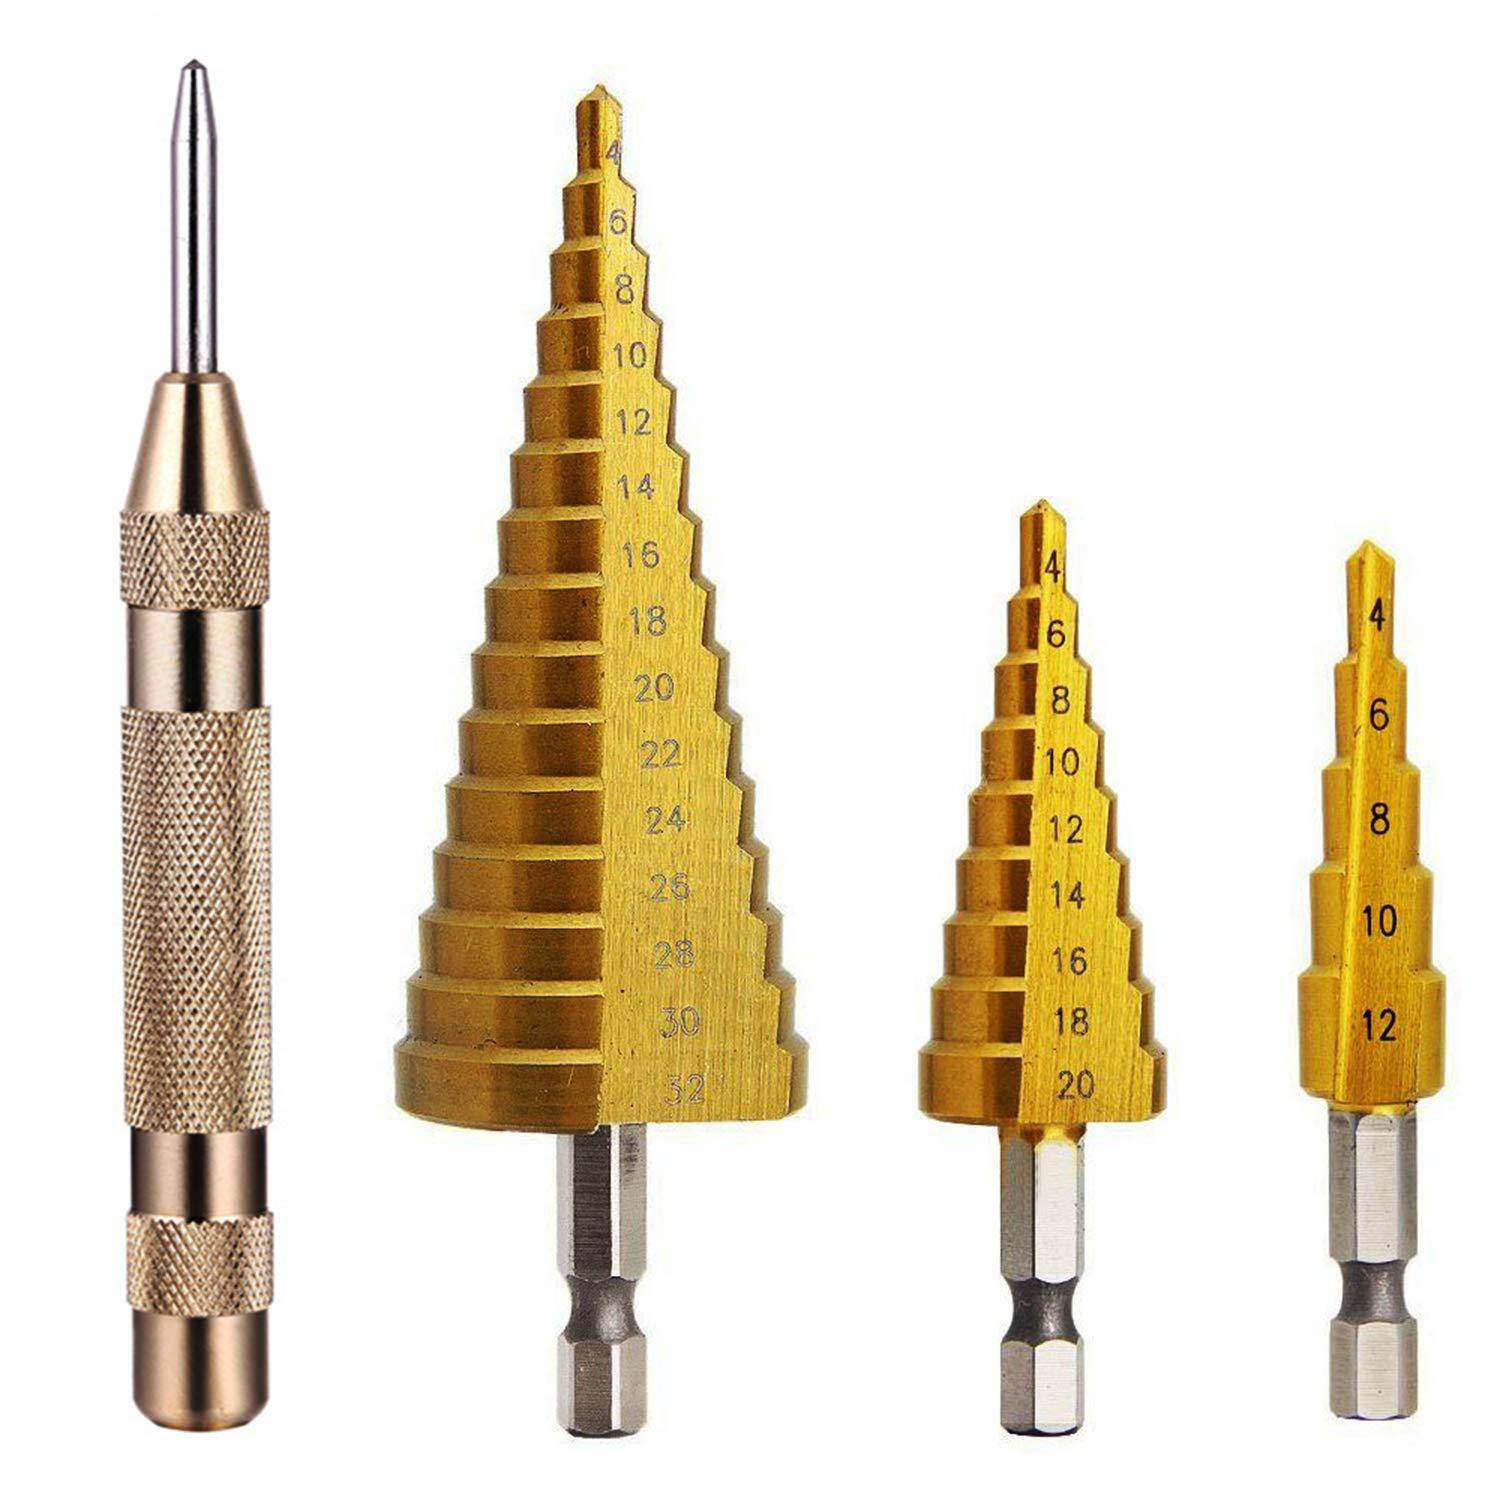 drill bits for metal